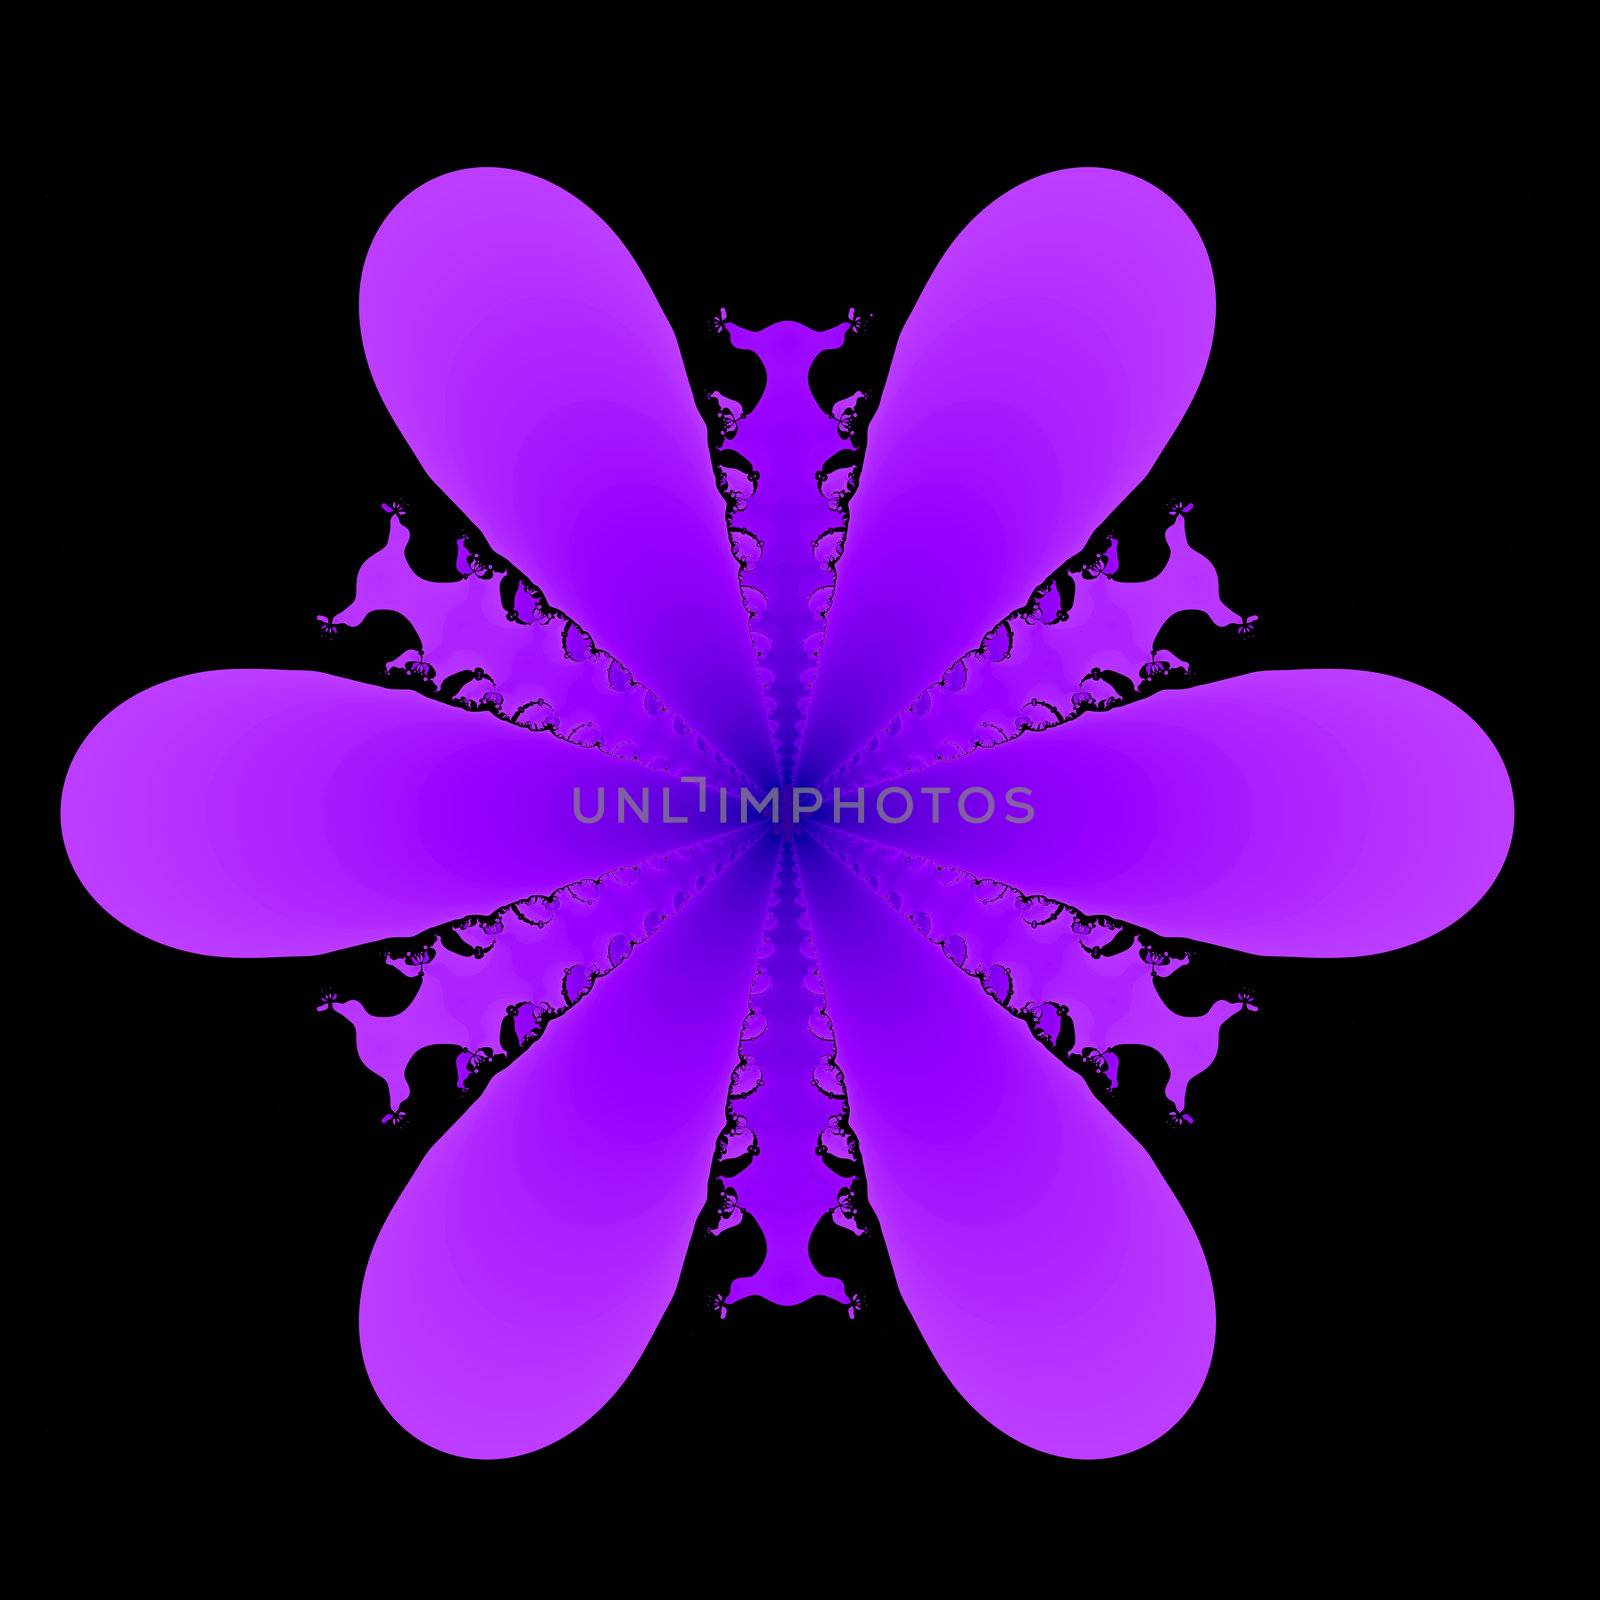 An abstract floral fractal done in shades of blue and purple.